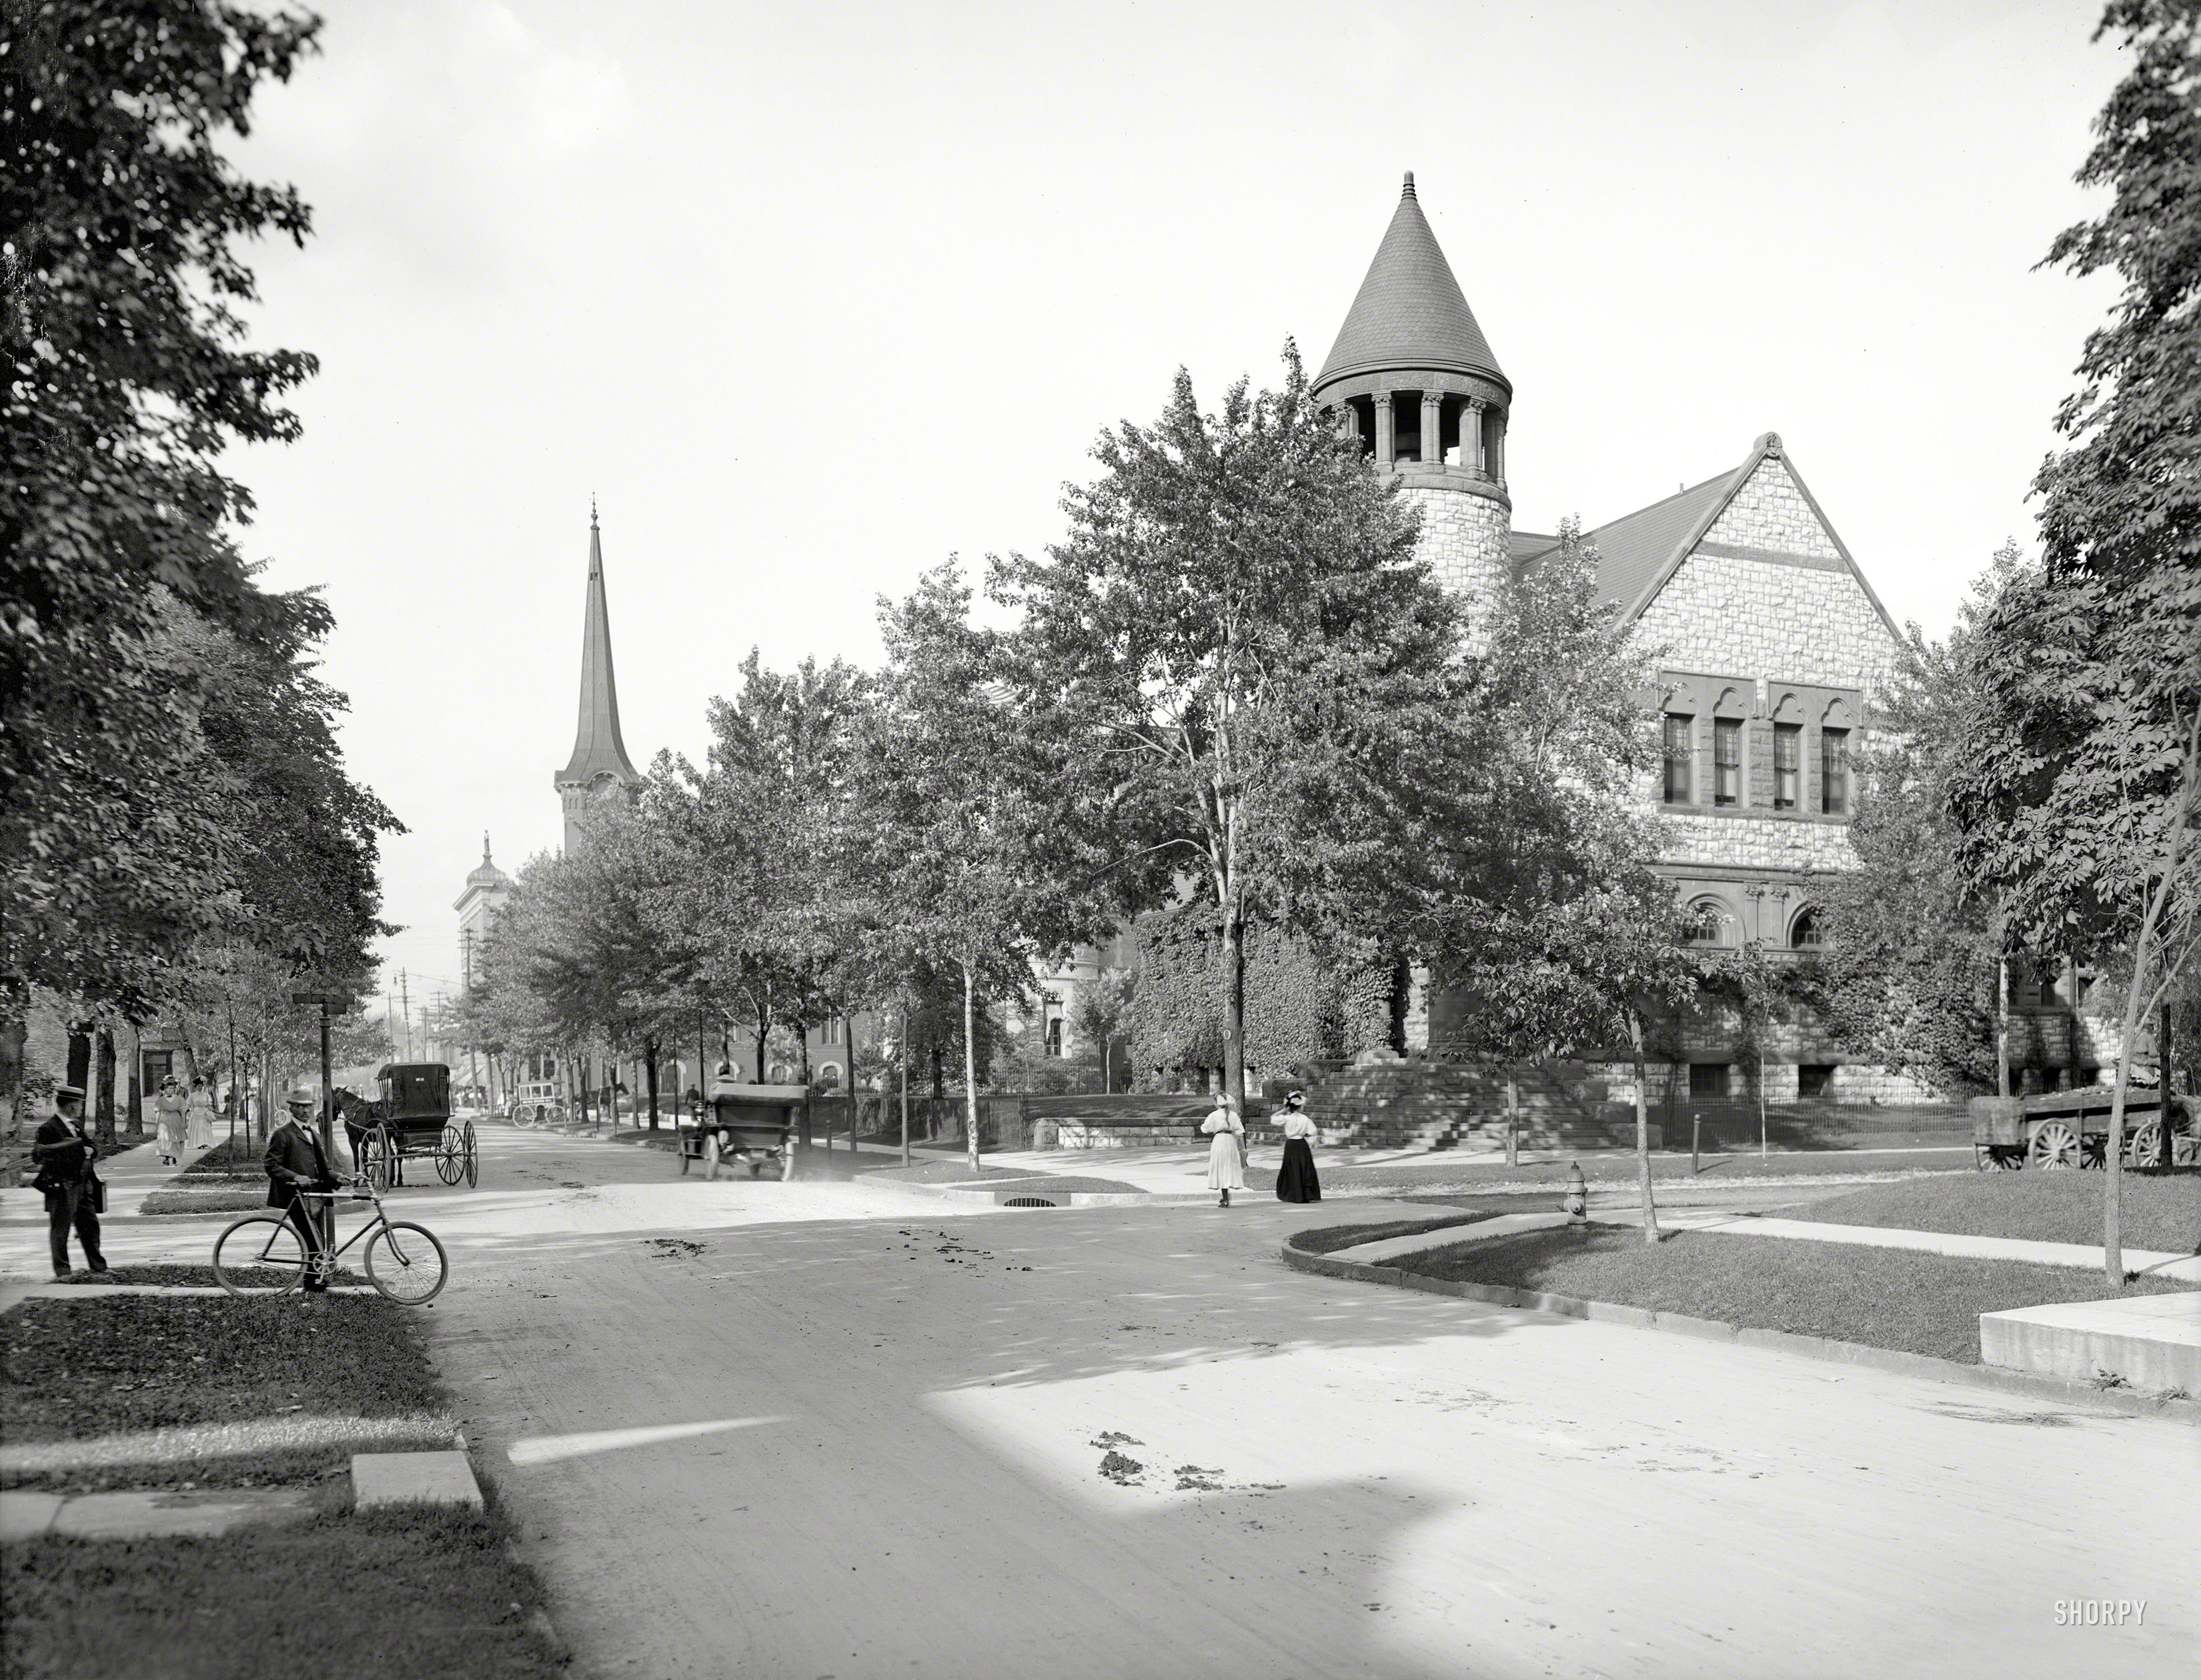 Saginaw, Michigan, circa 1908. "Hoyt Library." With a number of hazards for the unwary pedestrian. 8x10 glass negative, Detroit Publishing Co. View full size.